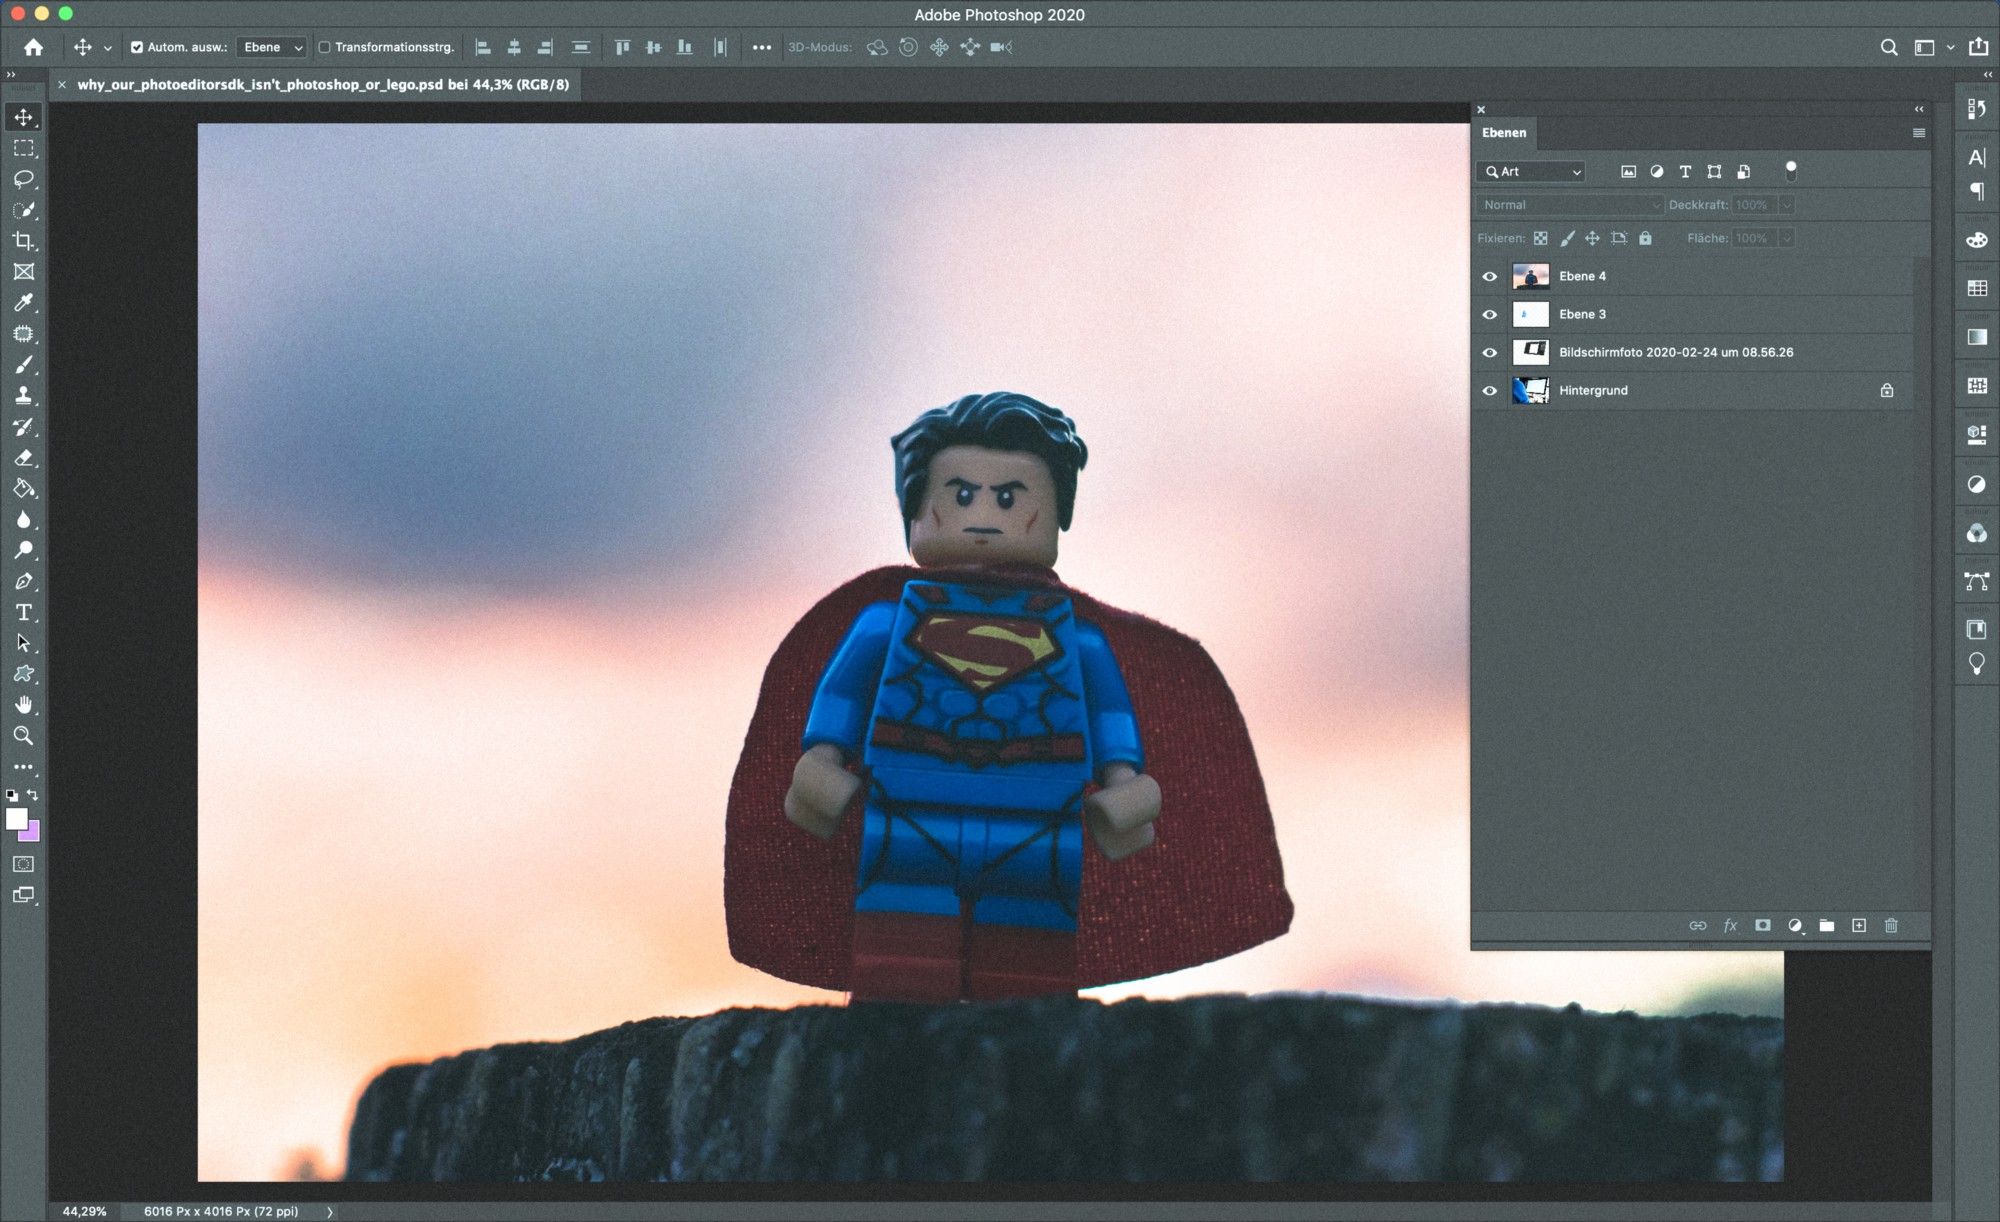 Why our SDK is not Photoshop or Lego.